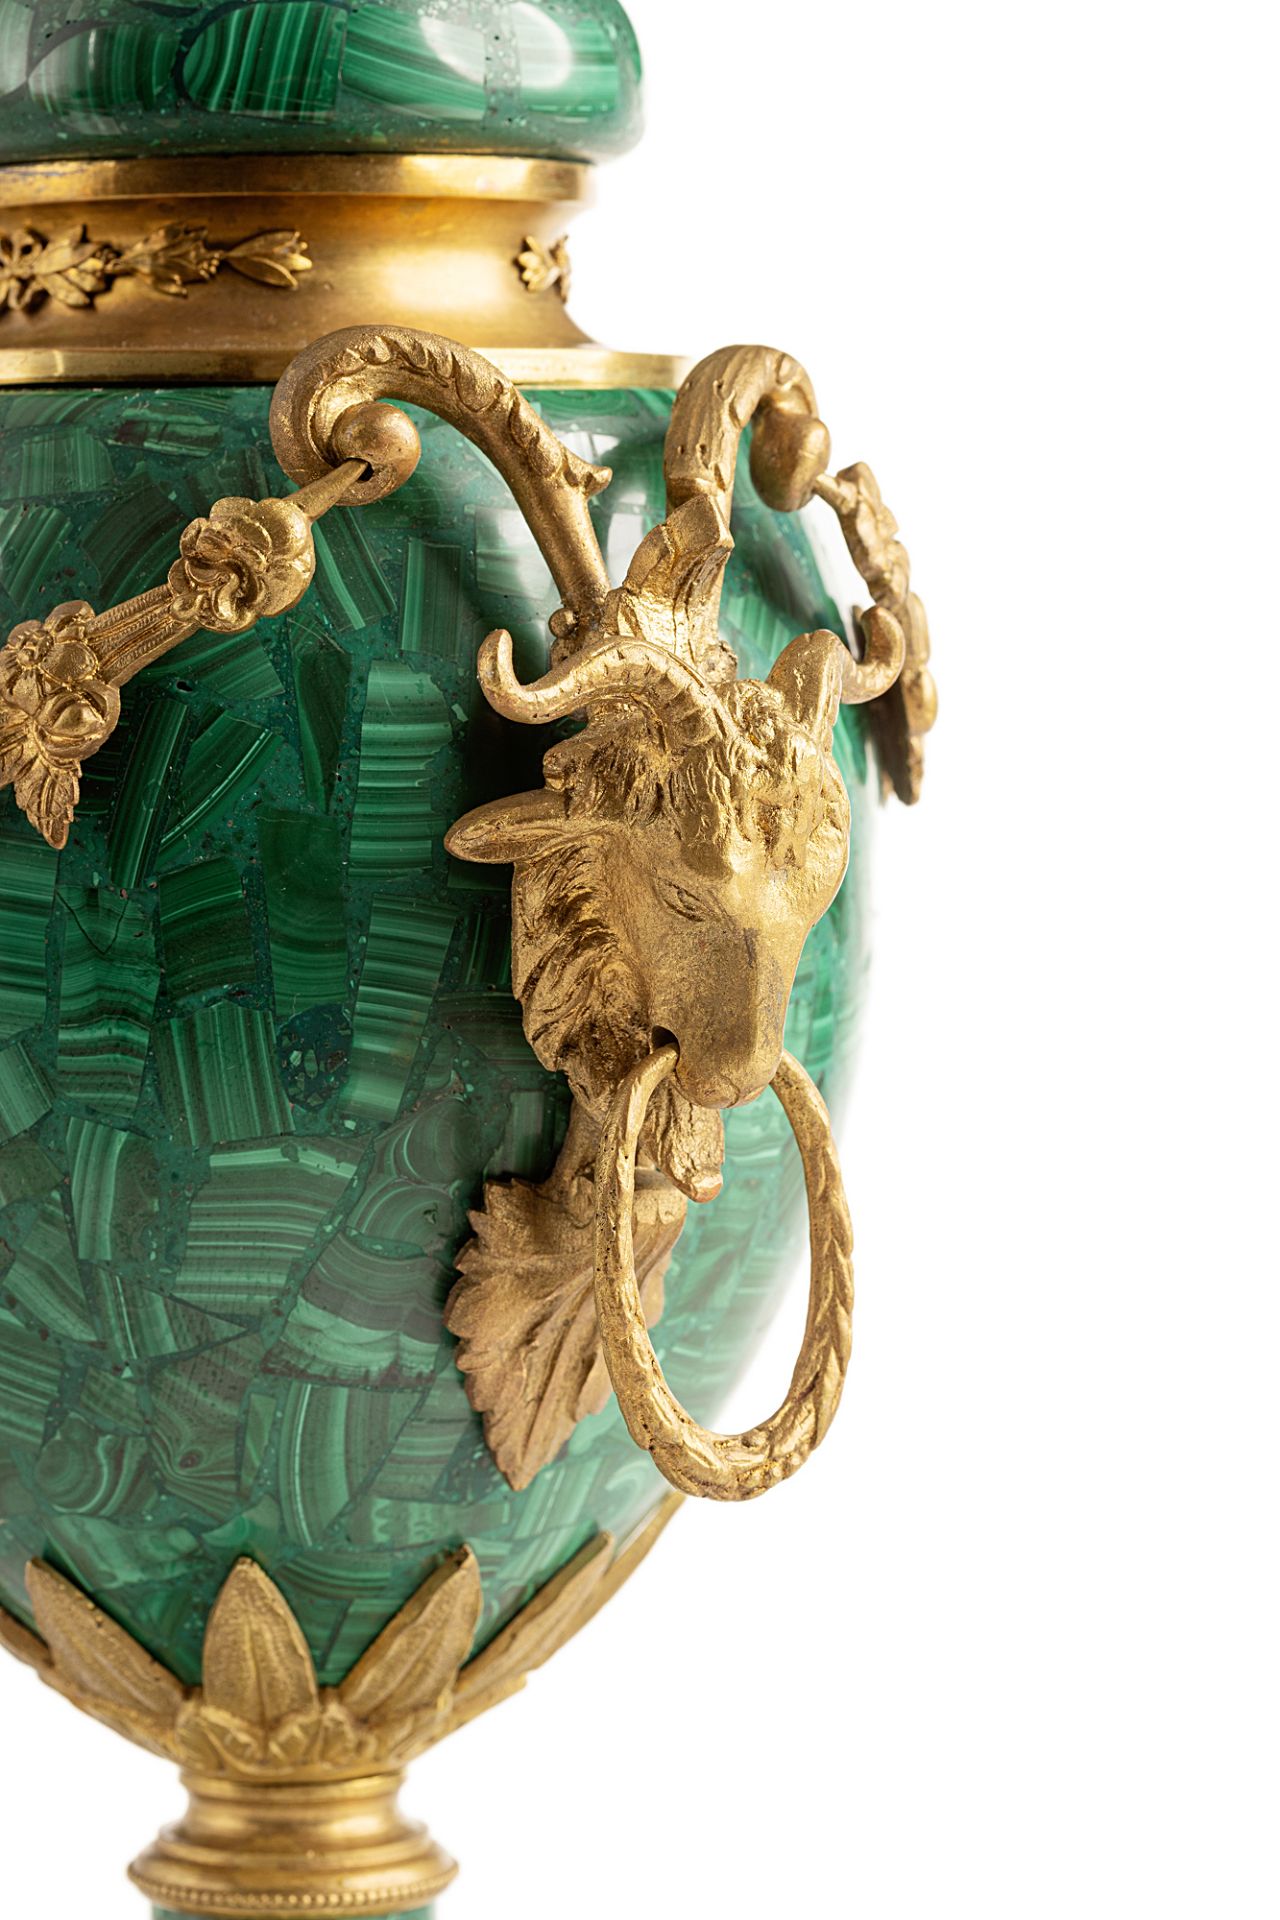 Pair of malachite vases in the style of French Early Classicism - Image 4 of 8